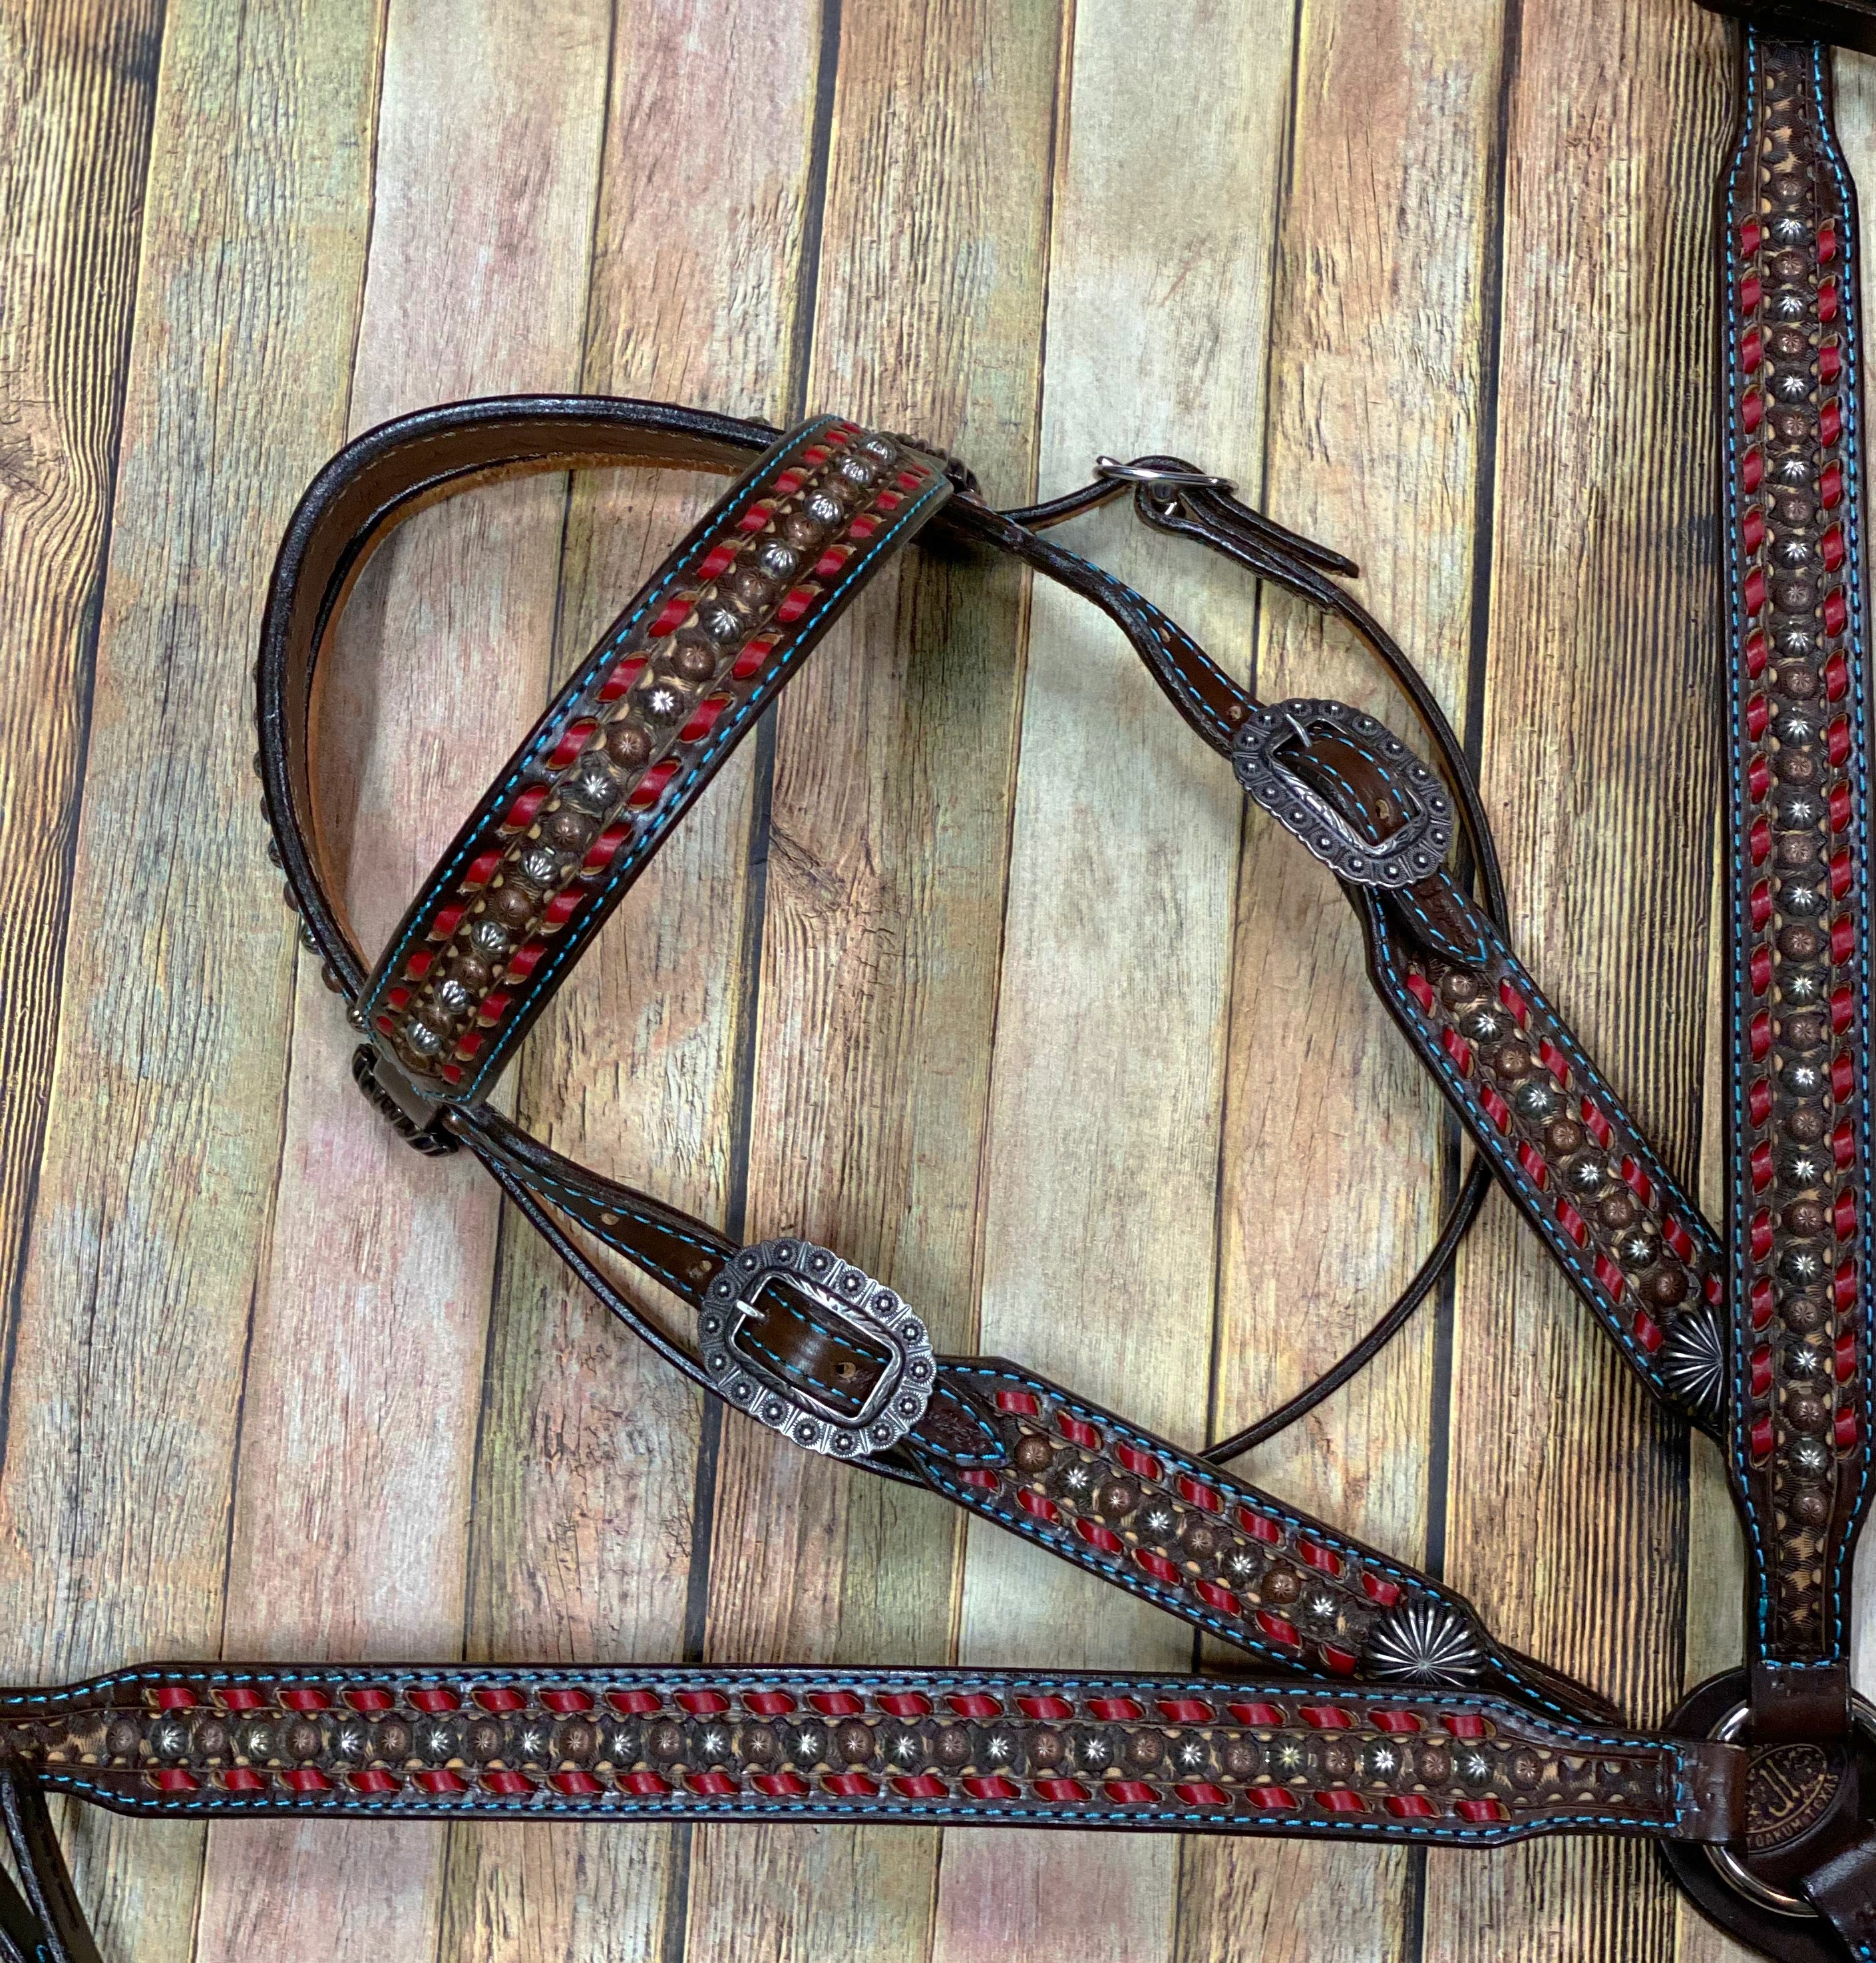 Western Brown Leather Bling Tack Set With White & Red Buckstitch